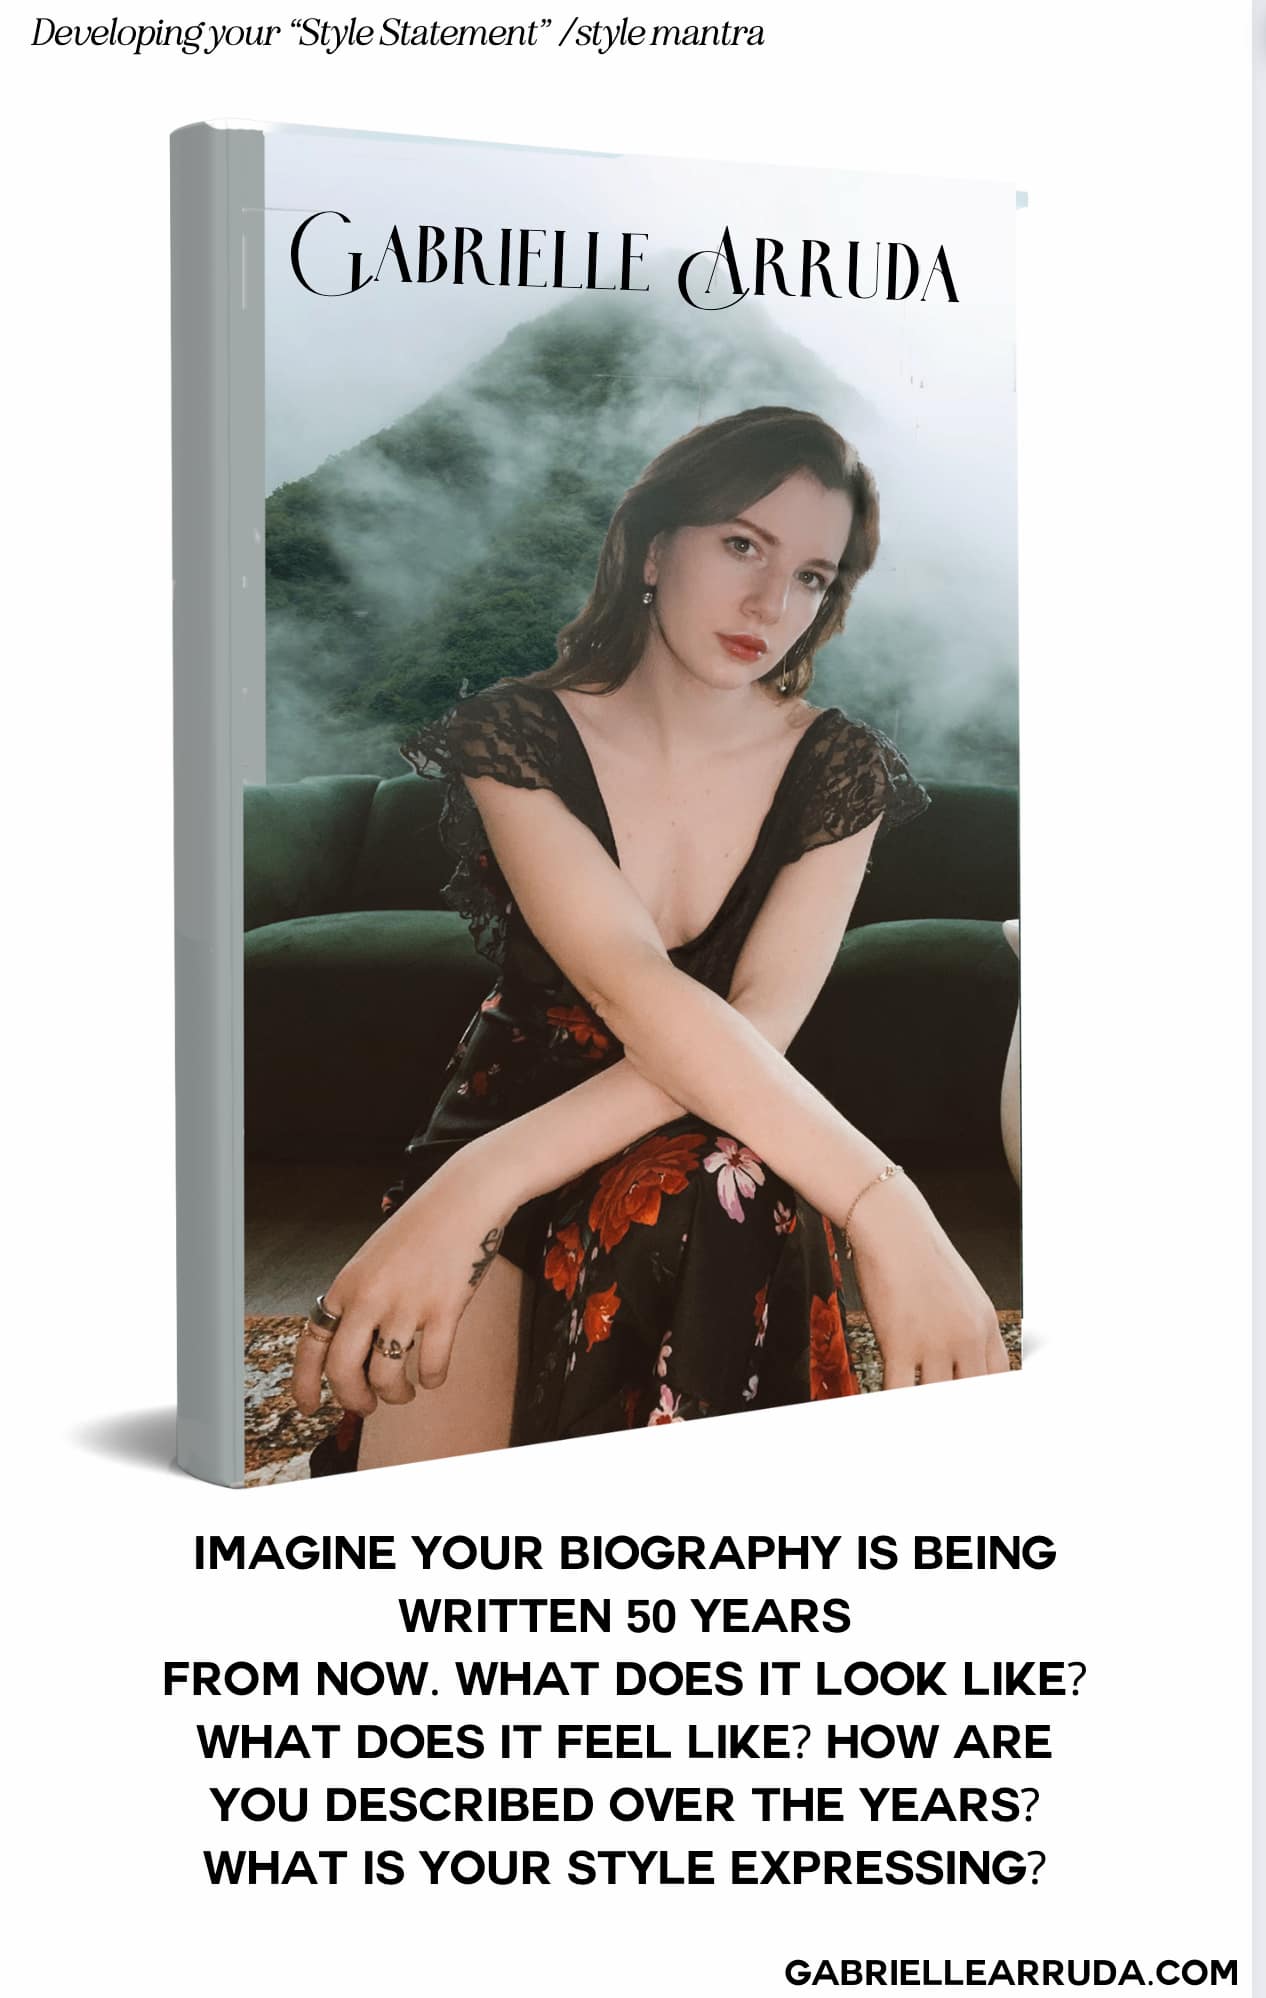 fake biography cover exercise in honing style statement aesthetic 